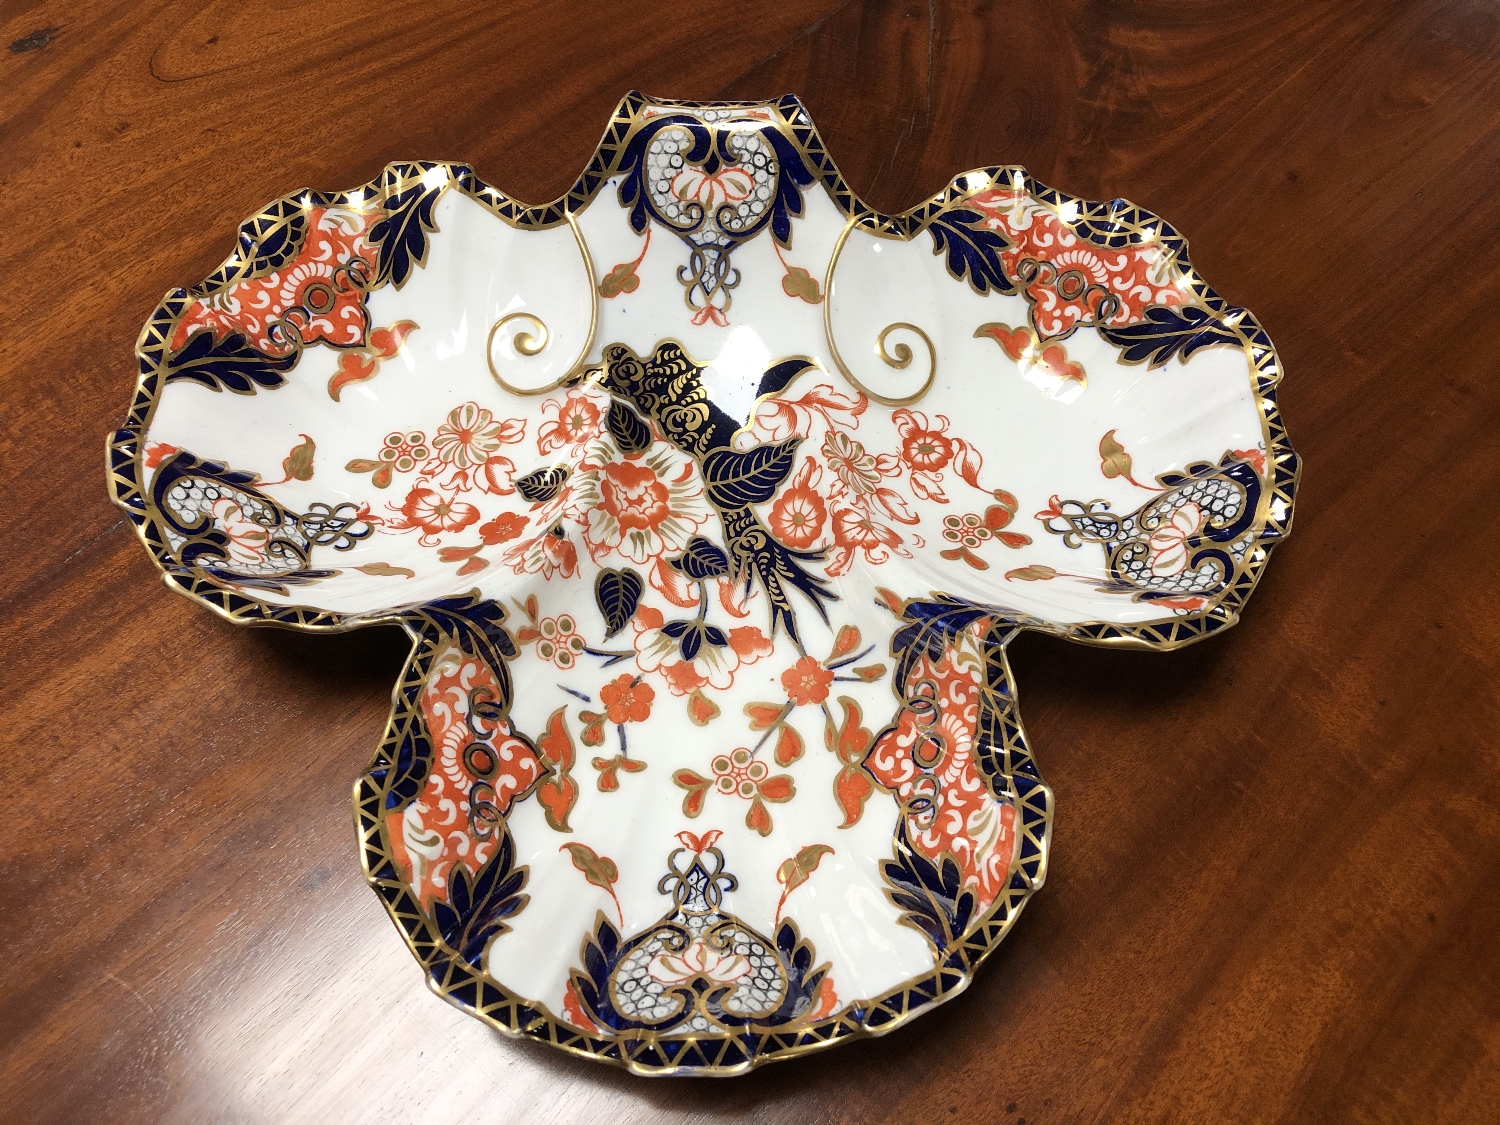 An antique Royal Crown Derby shell dish